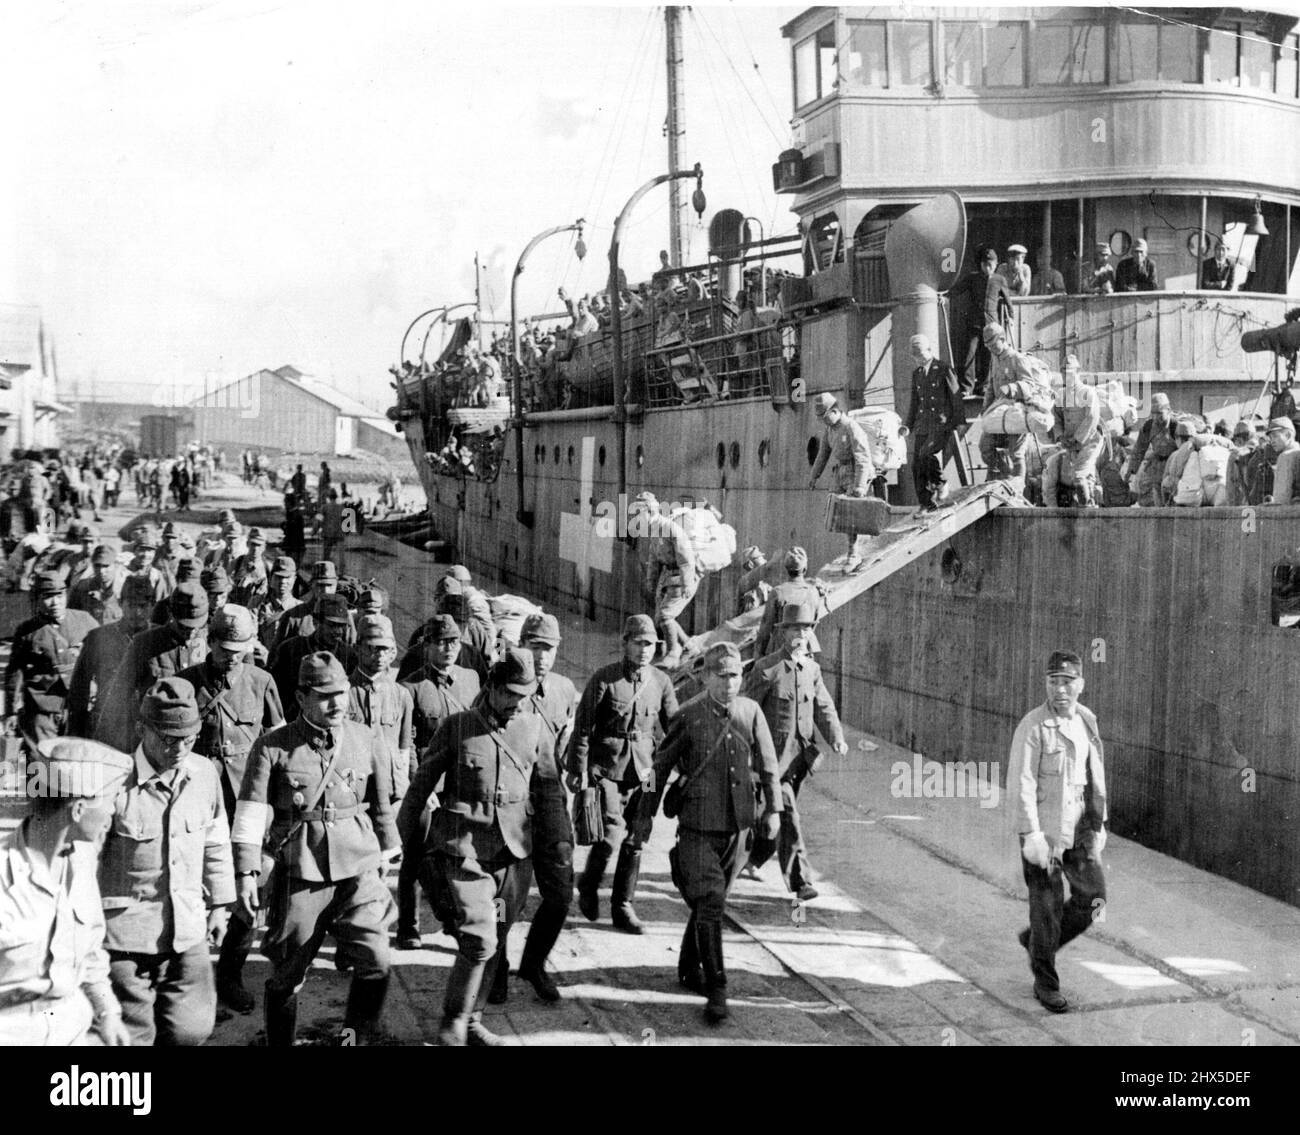 Jap Troops Repatriated from Korea -- Japanese troops are seen here as they debark ship upon return form Korea to Japan for demobilization. The ship 'Kainei Maru' bears white cross as required by Allied powers and is being used to transport troops to Japan and Koreans back to Korea. It is docked at Kyushu port at Fukuoka. October 21, 1945. (Photo by U.S. Army Photo). Stock Photo